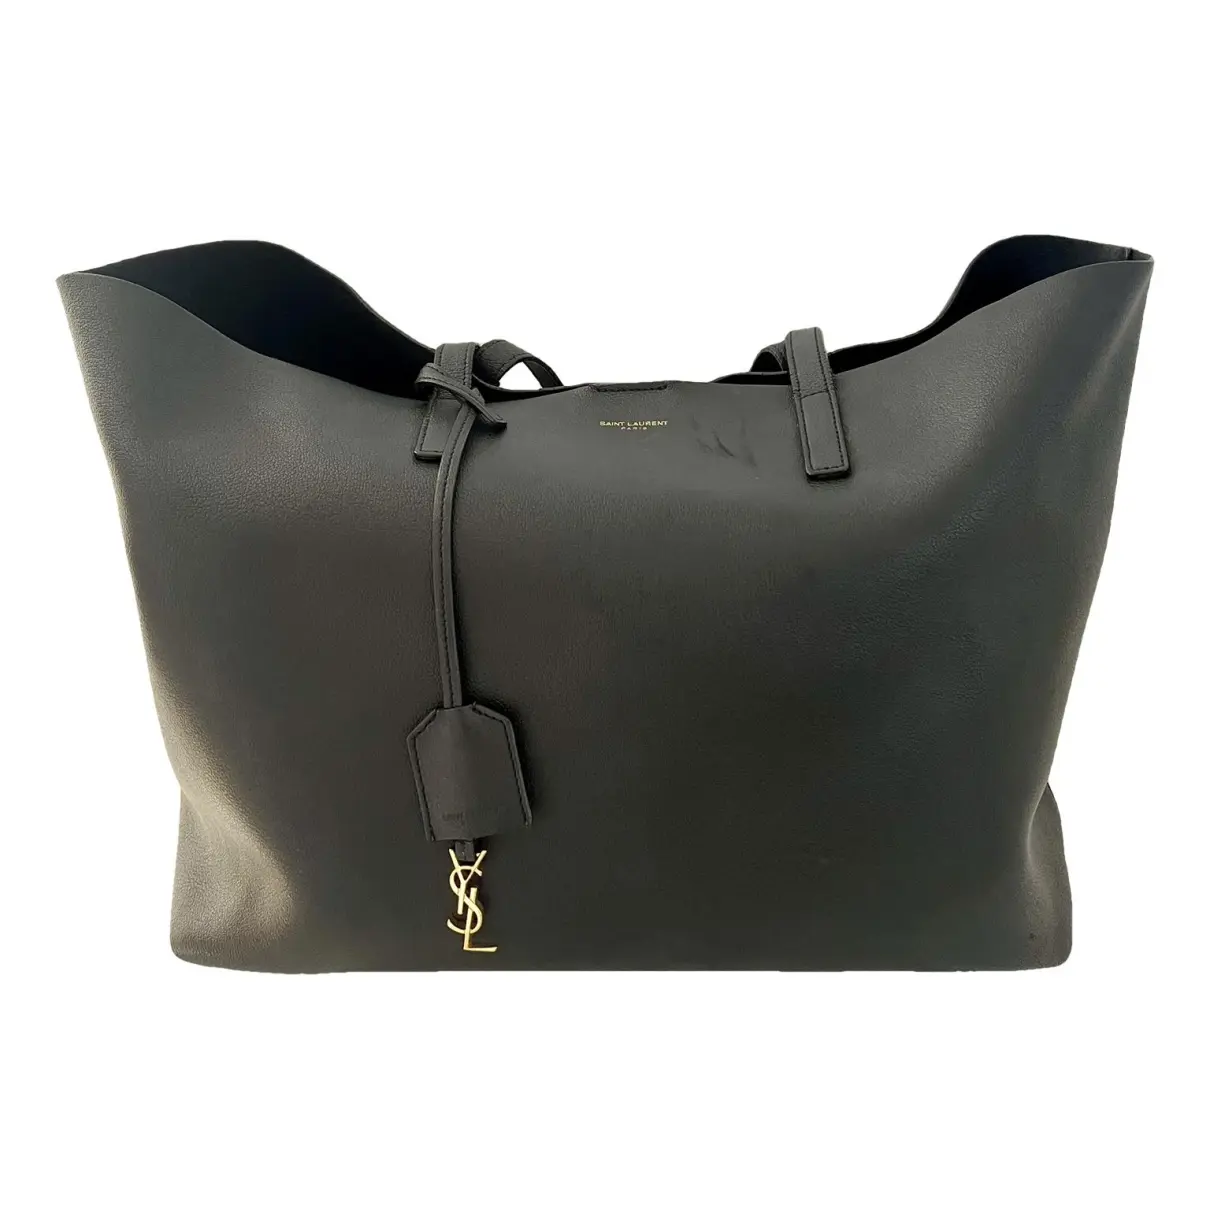 Shopping leather tote